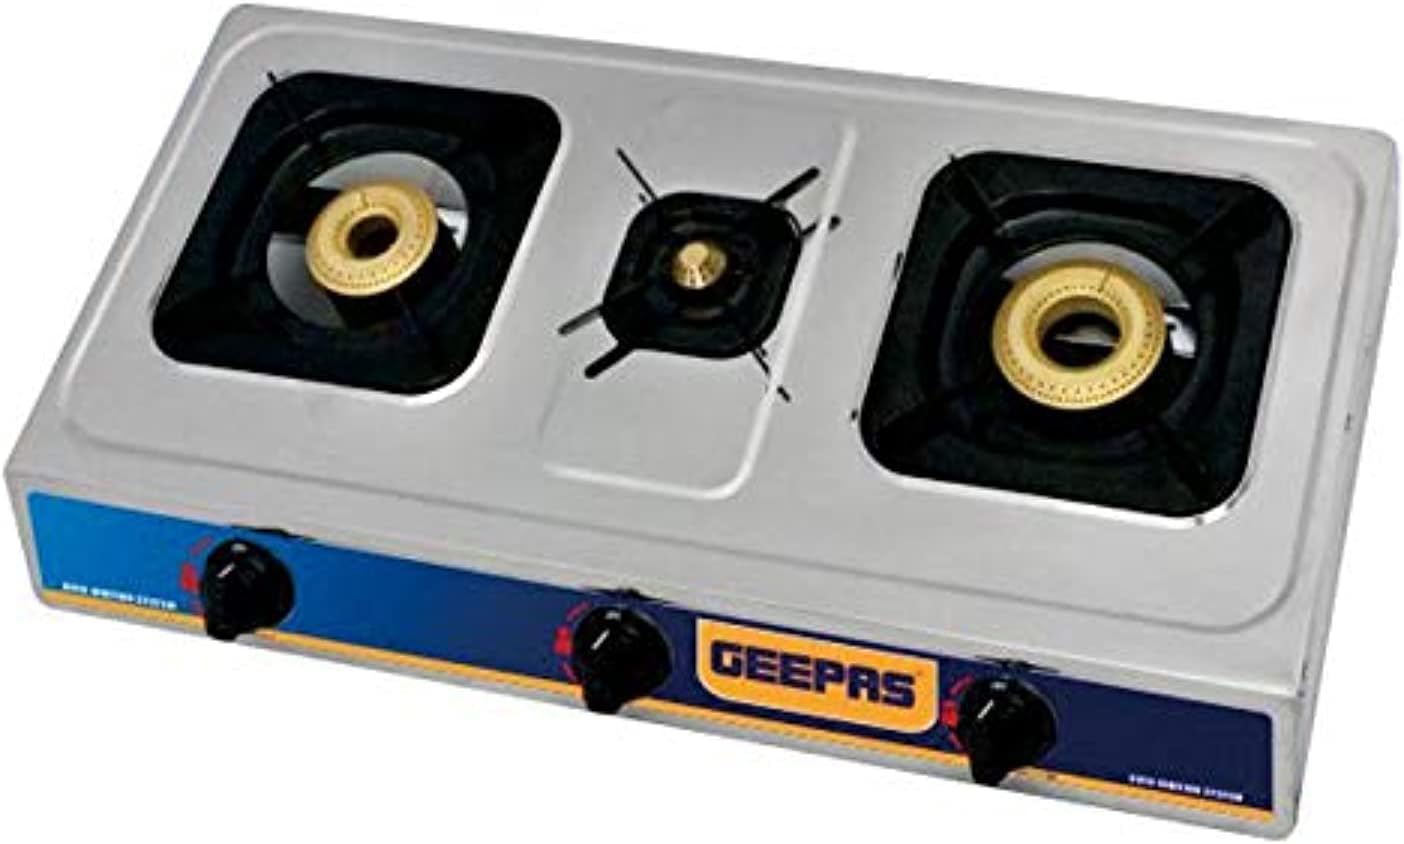 Geepas Triple Burner Stainless Steel Gas Stove With Auto Ignition GK6857